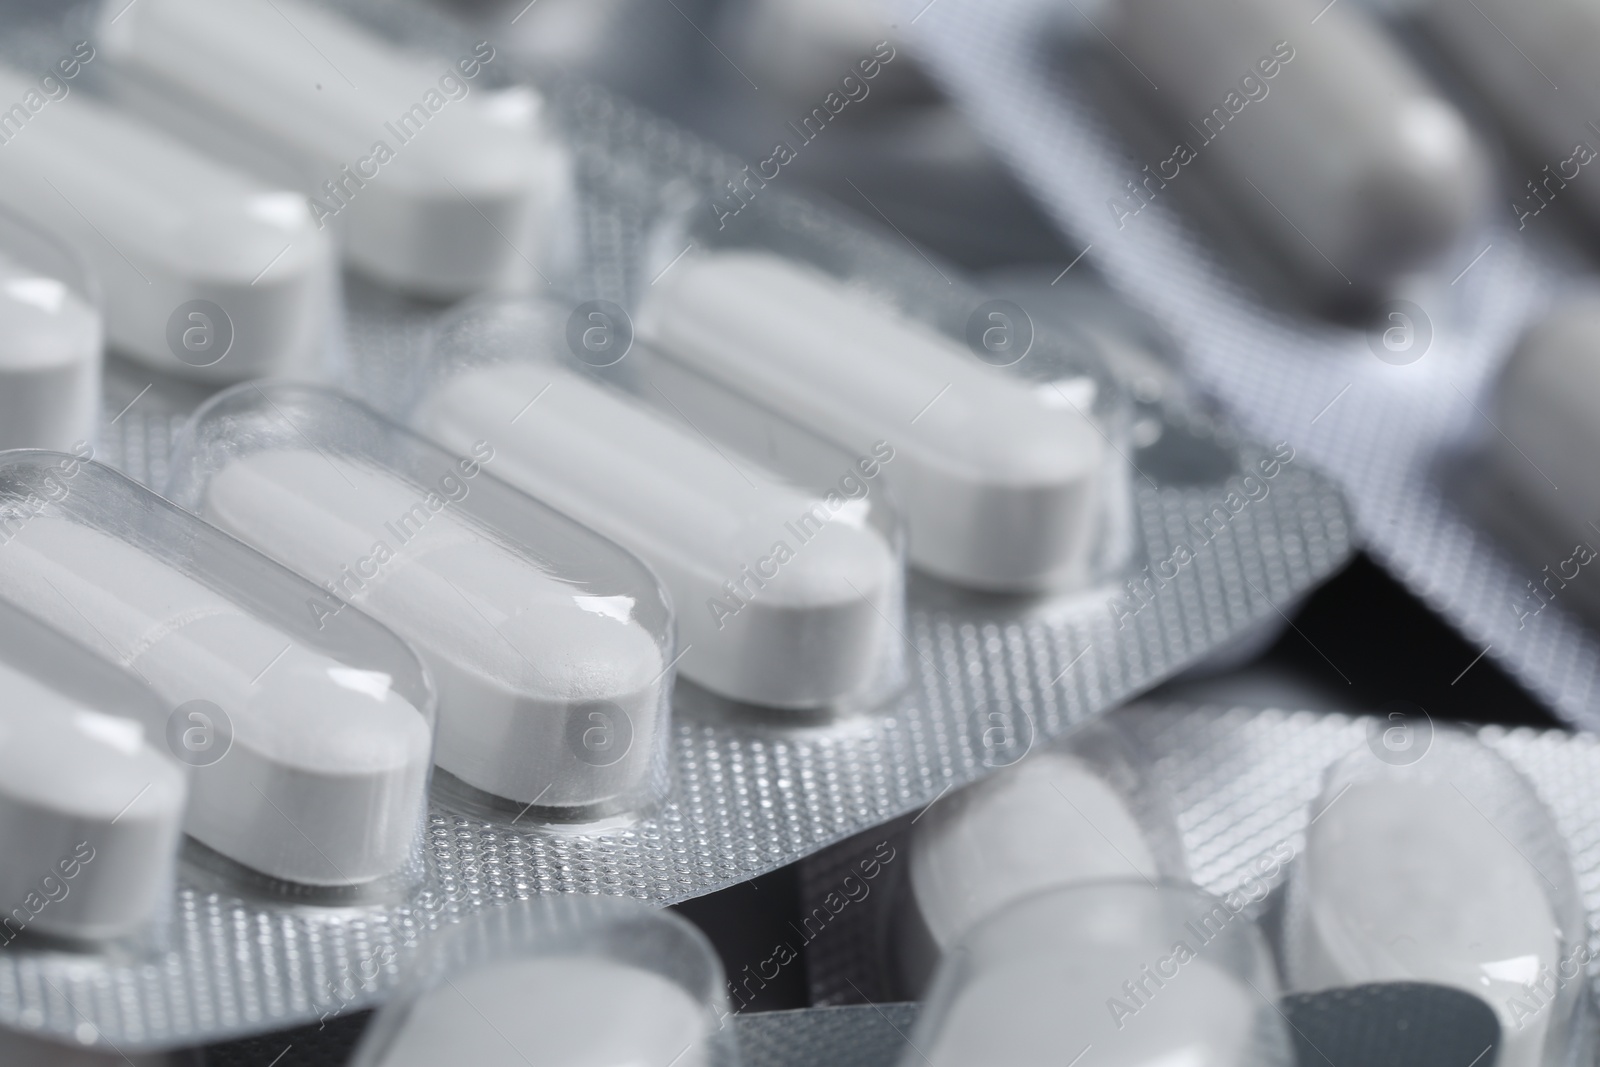 Photo of Many different pills in blisters, closeup view